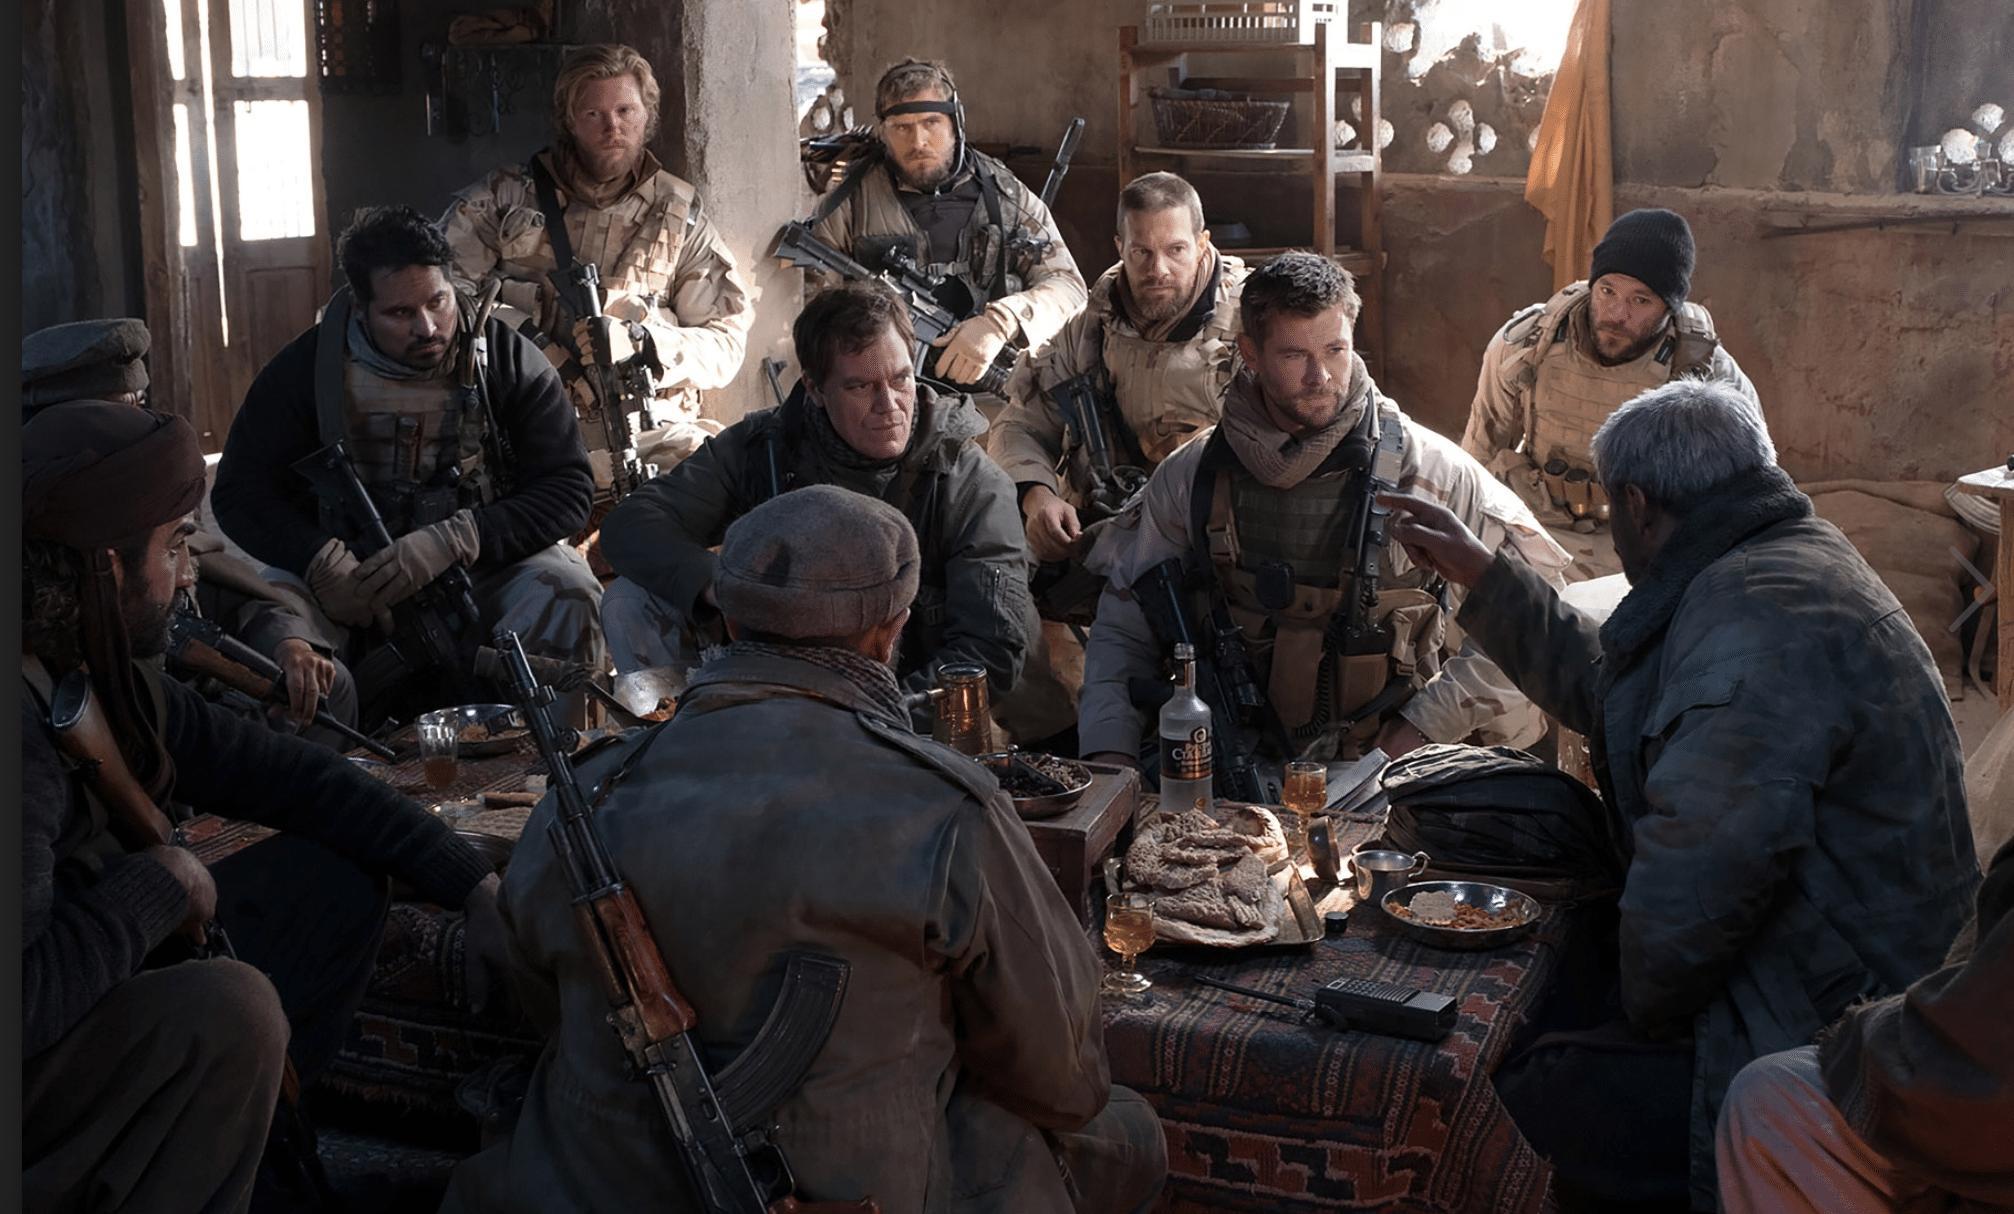 12 Strong Movie Review For Families - simplytodaylife.com